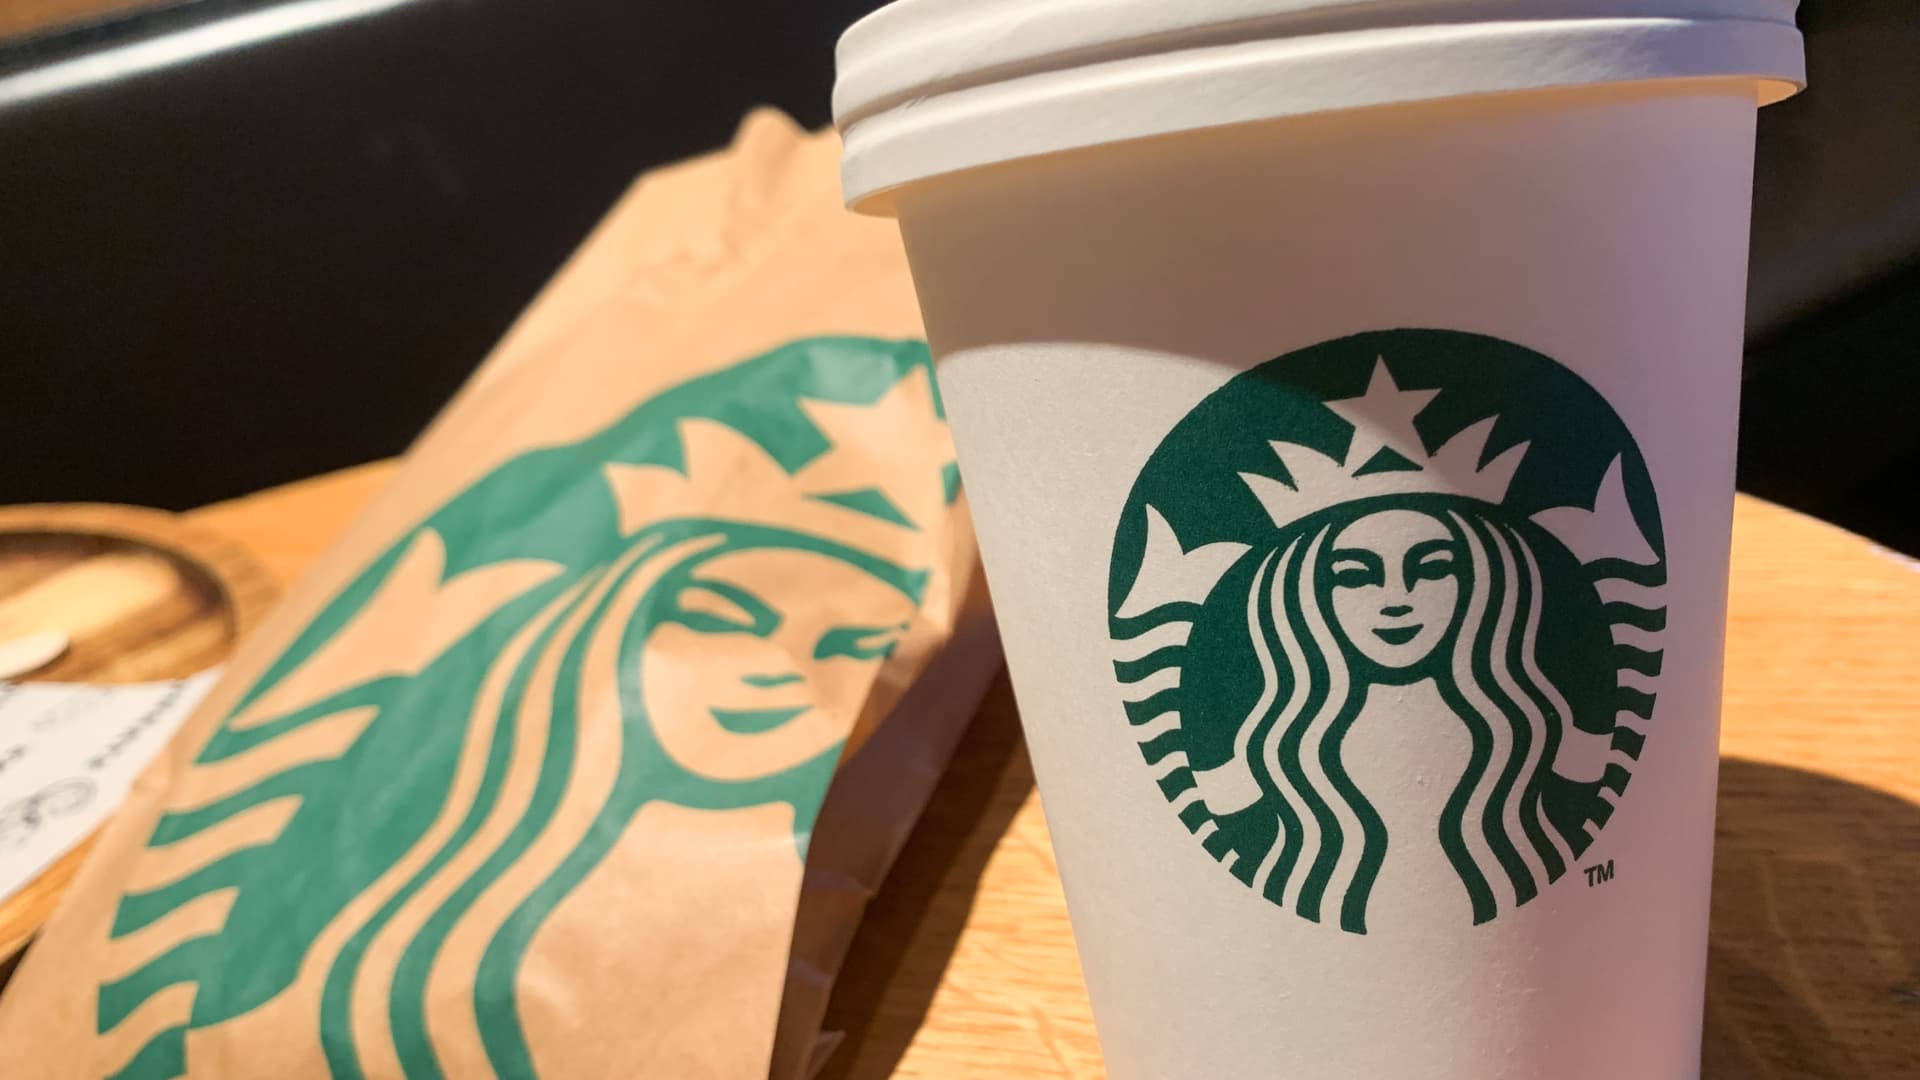 Starbucks beats earnings estimates, but sales disappoint despite China boom